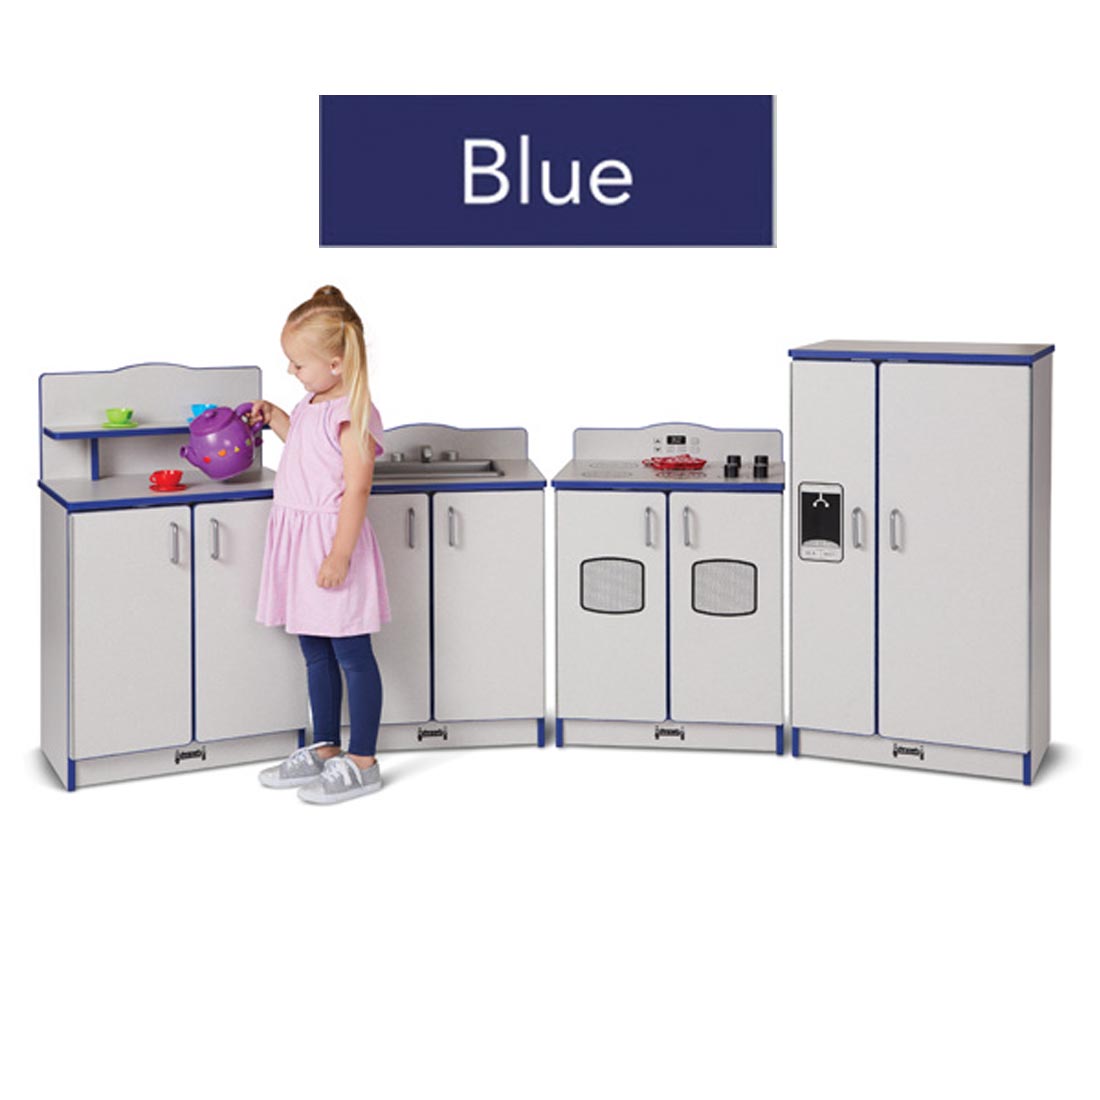 Child pouring tea in the 4-Piece Kitchen Set with colored edges; text overly labeled Blue